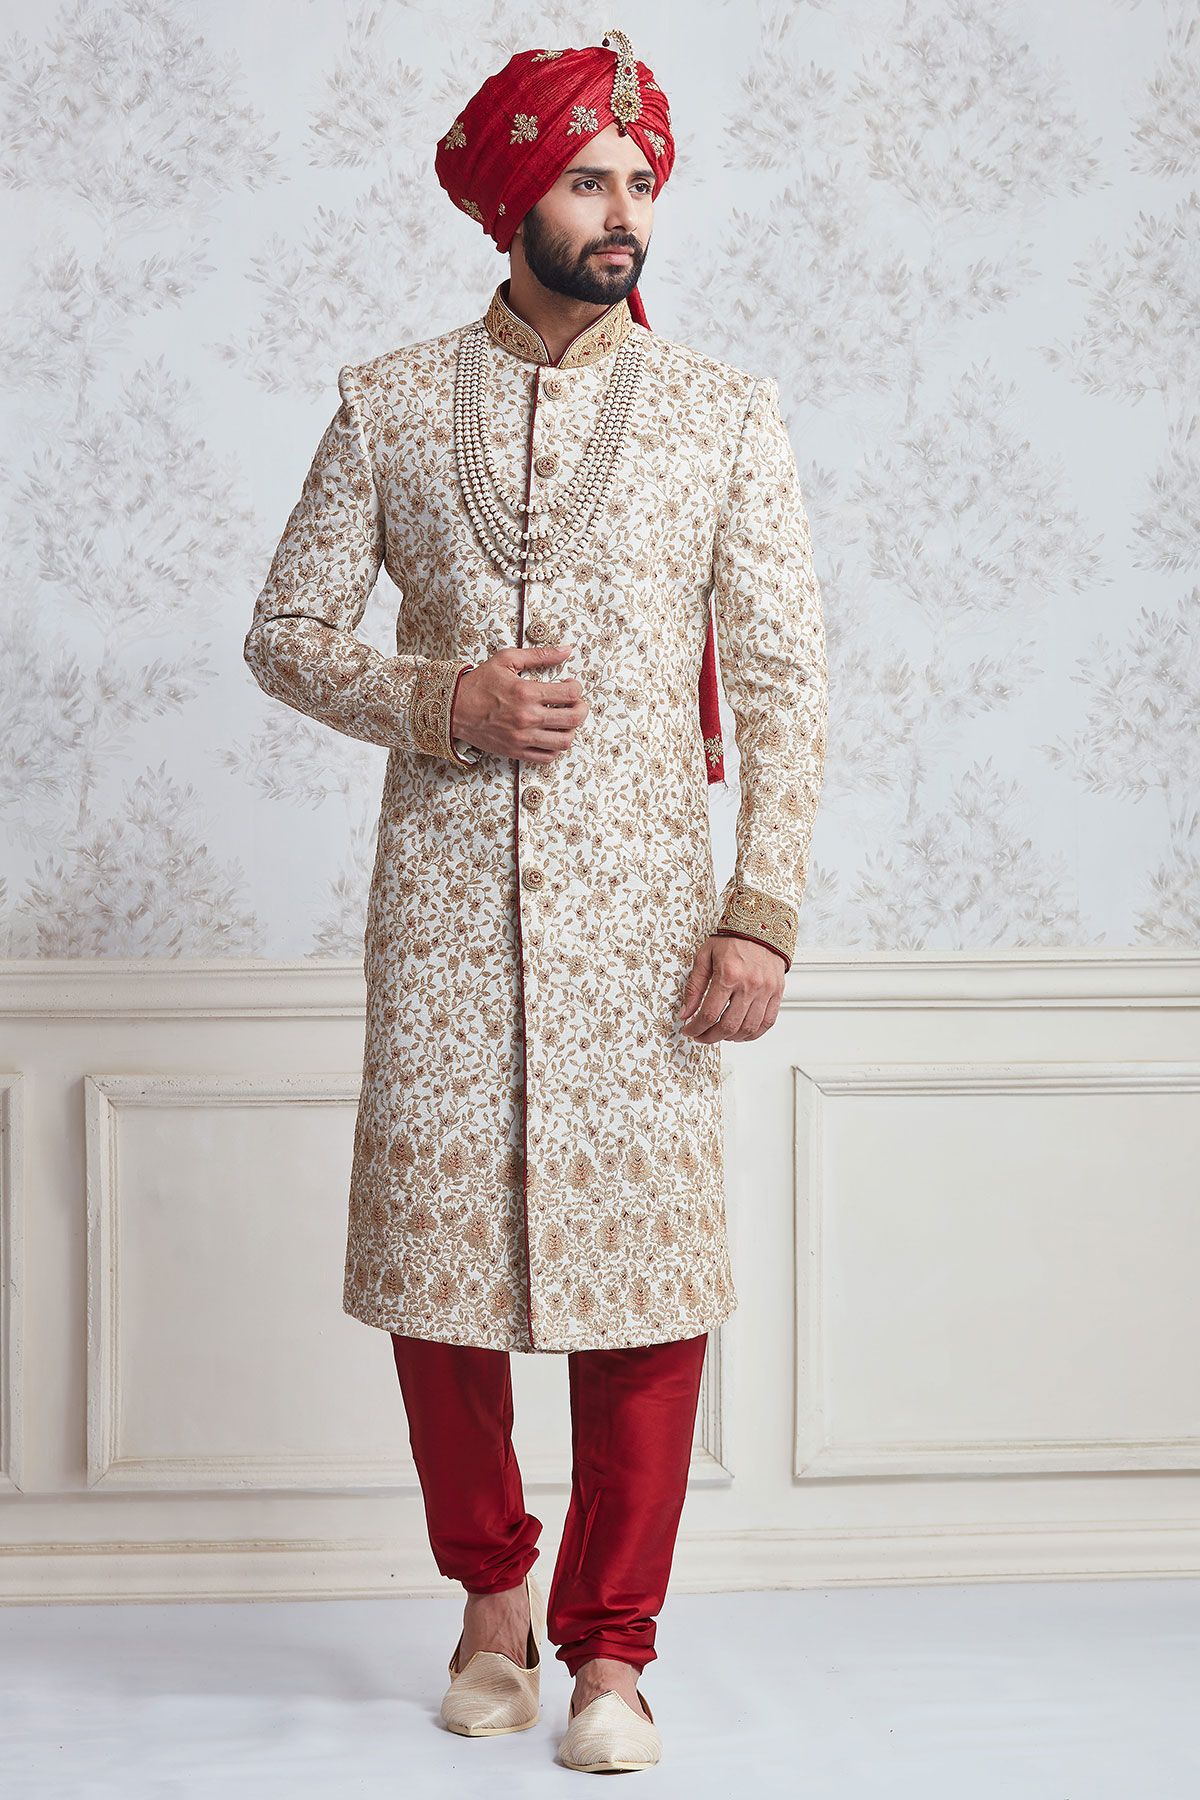 Sherwani Rental for Destination Weddings: What You Need to Know